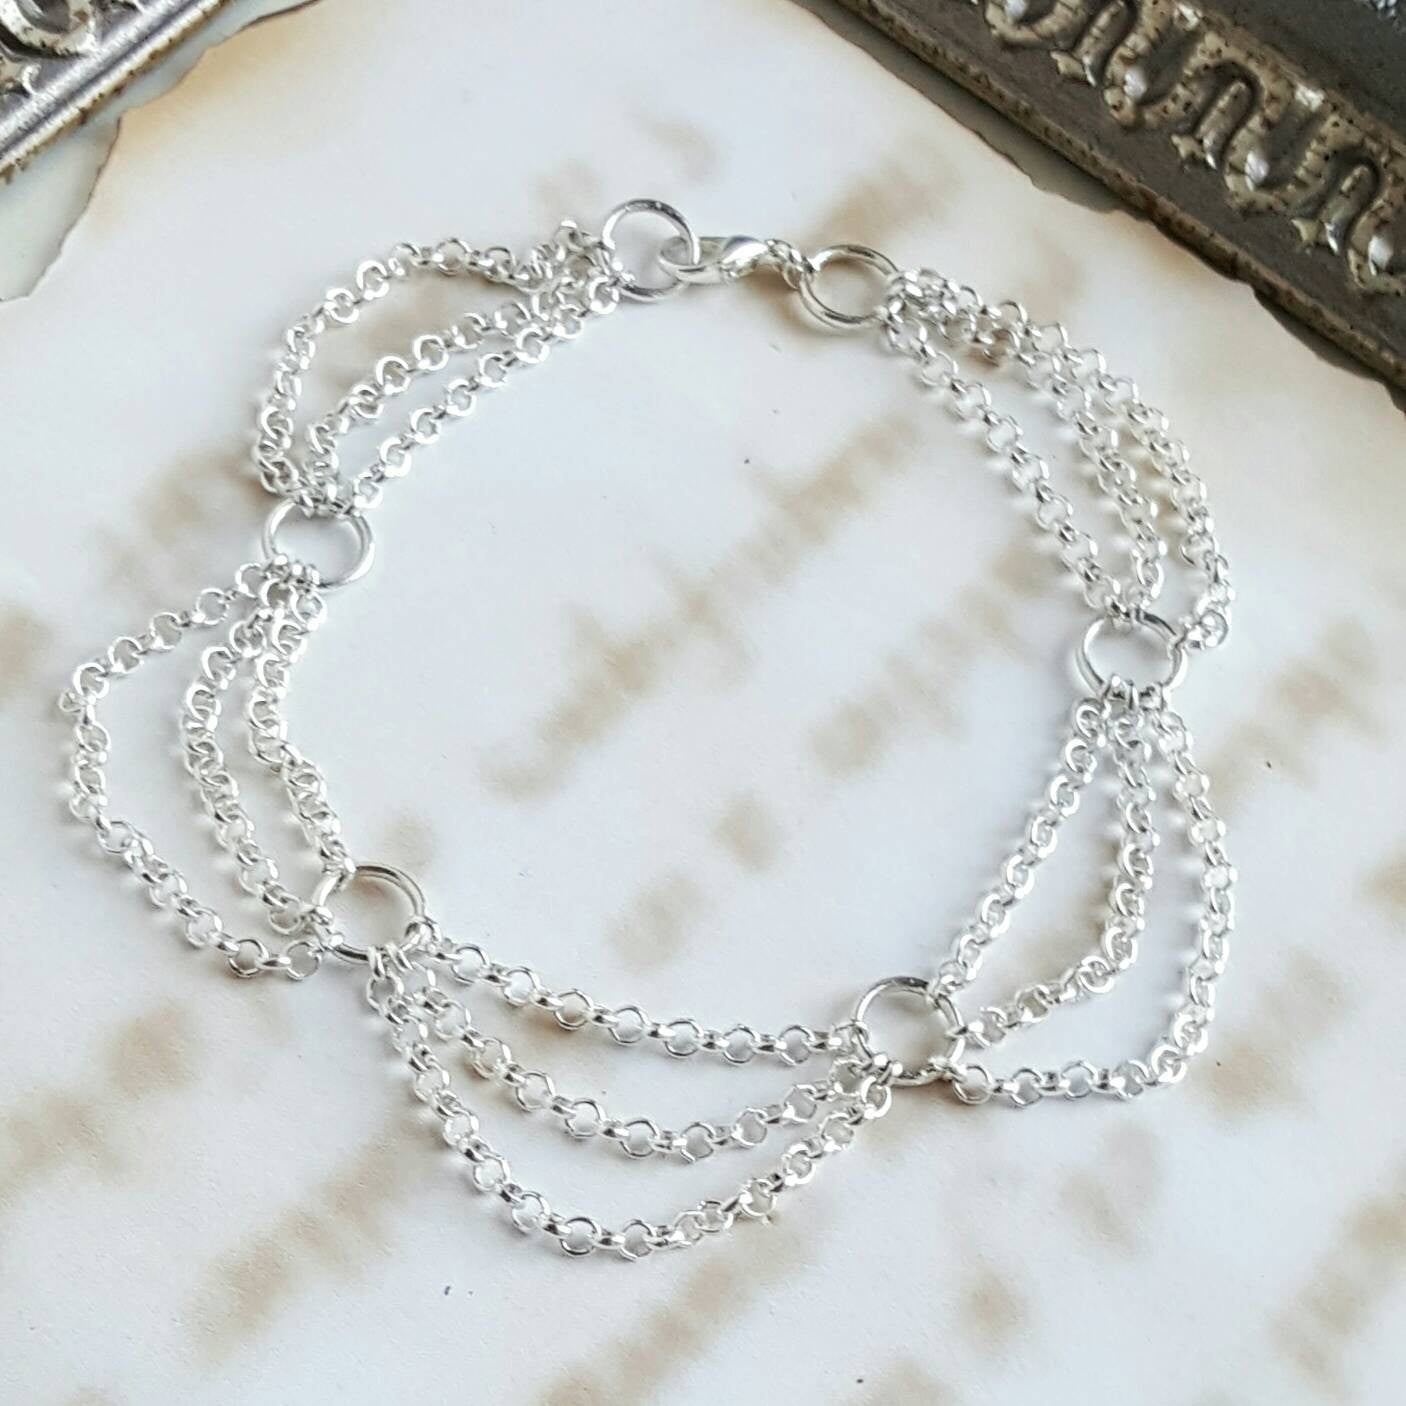 Draped Silver Anklet Summer Beach Festival Jewelry - DRAVYNMOOR